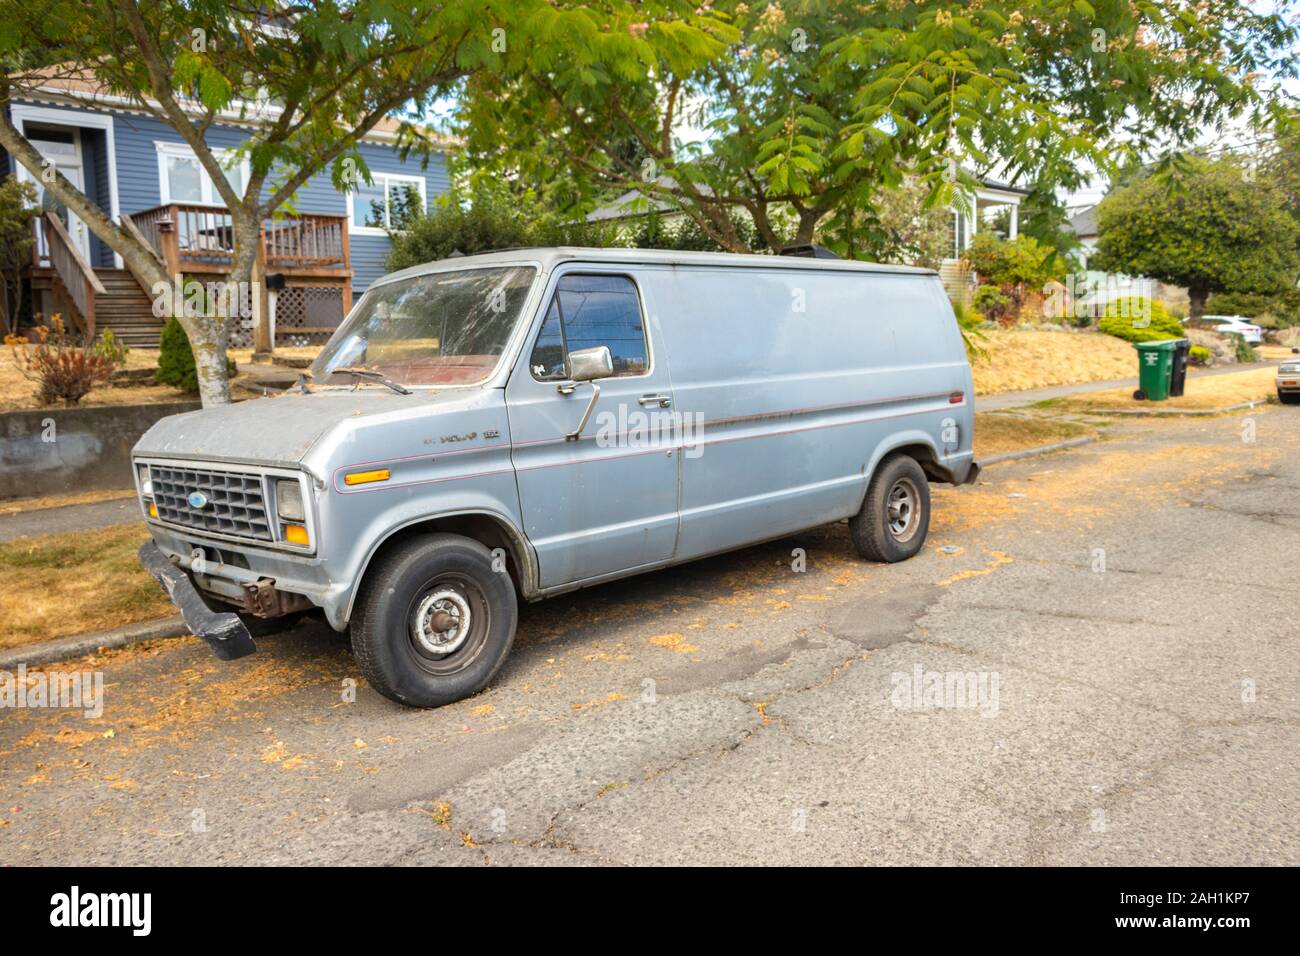 1970s Ford Econoline E150 in parked in American street Stock Photo